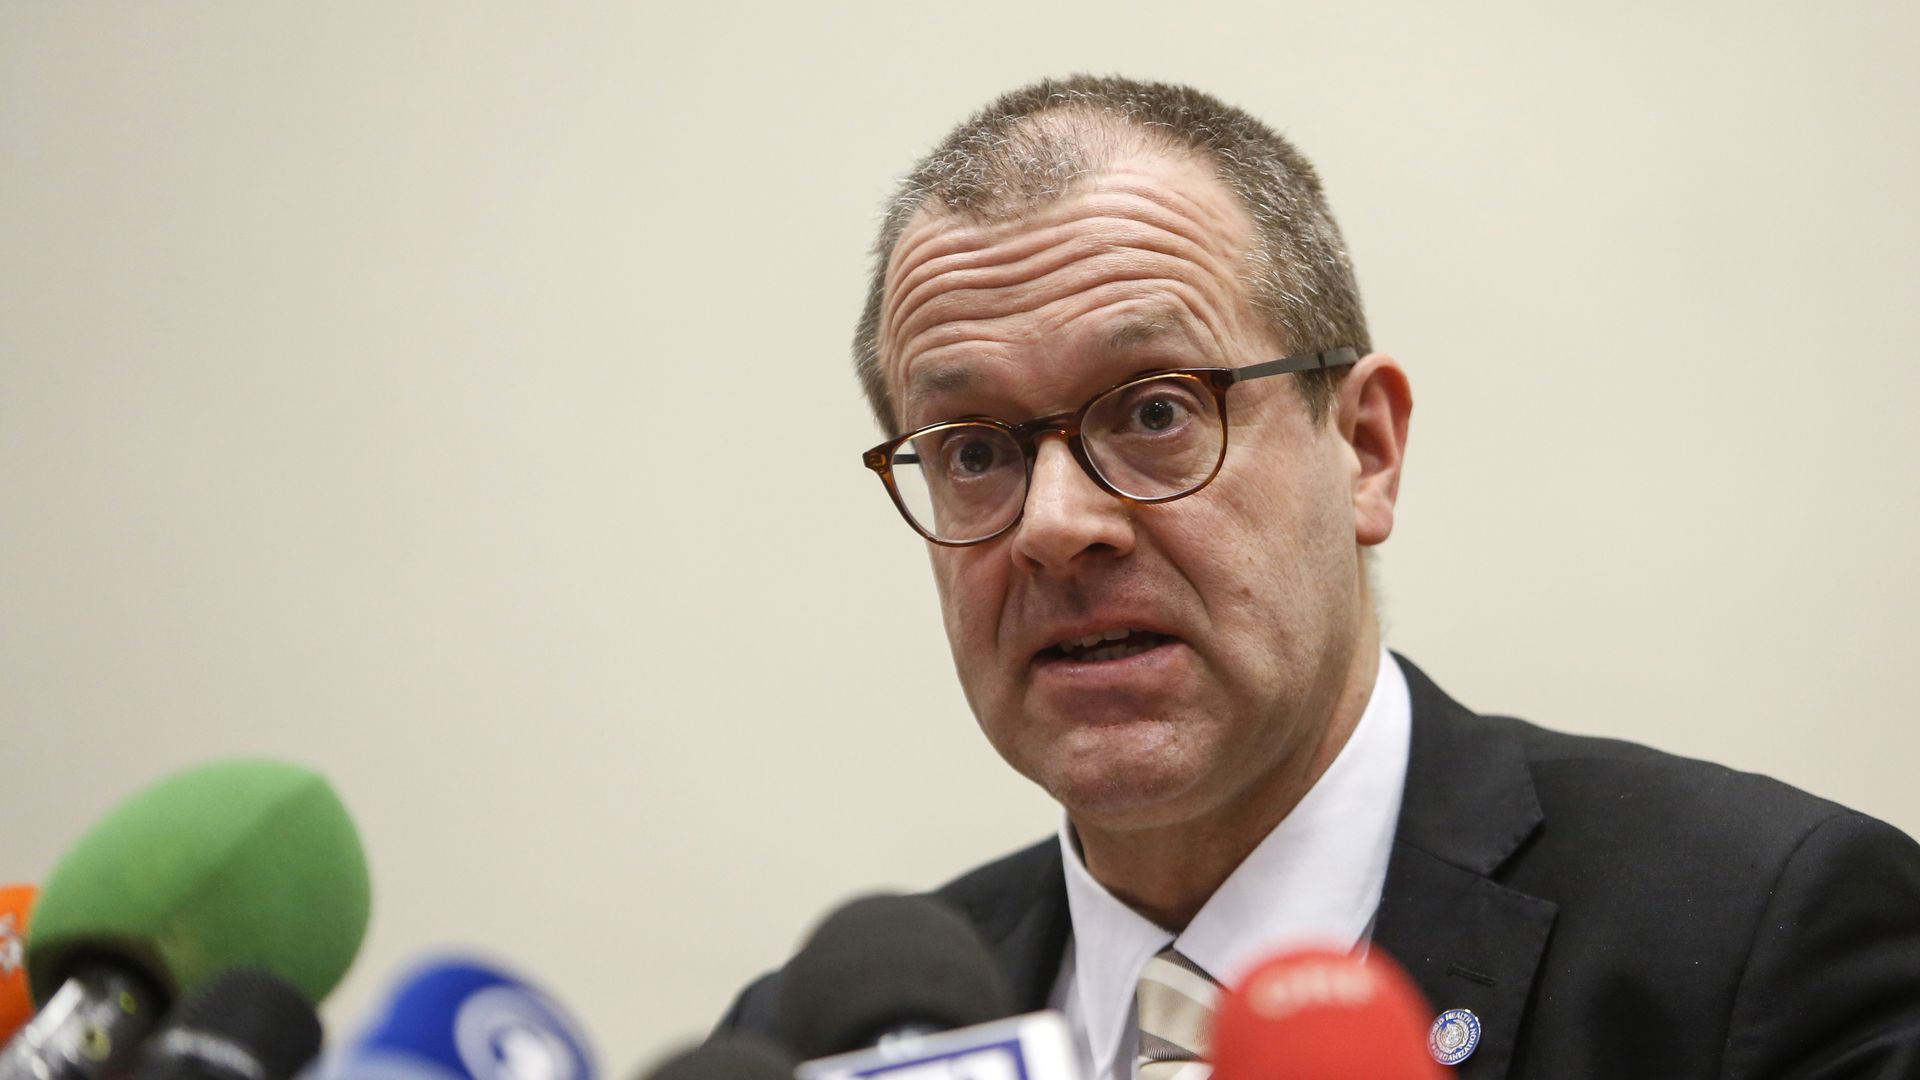 Hans Kluge, European director of World Health Organization (WHO), attends a press conference in Rome, Italy, on February 26